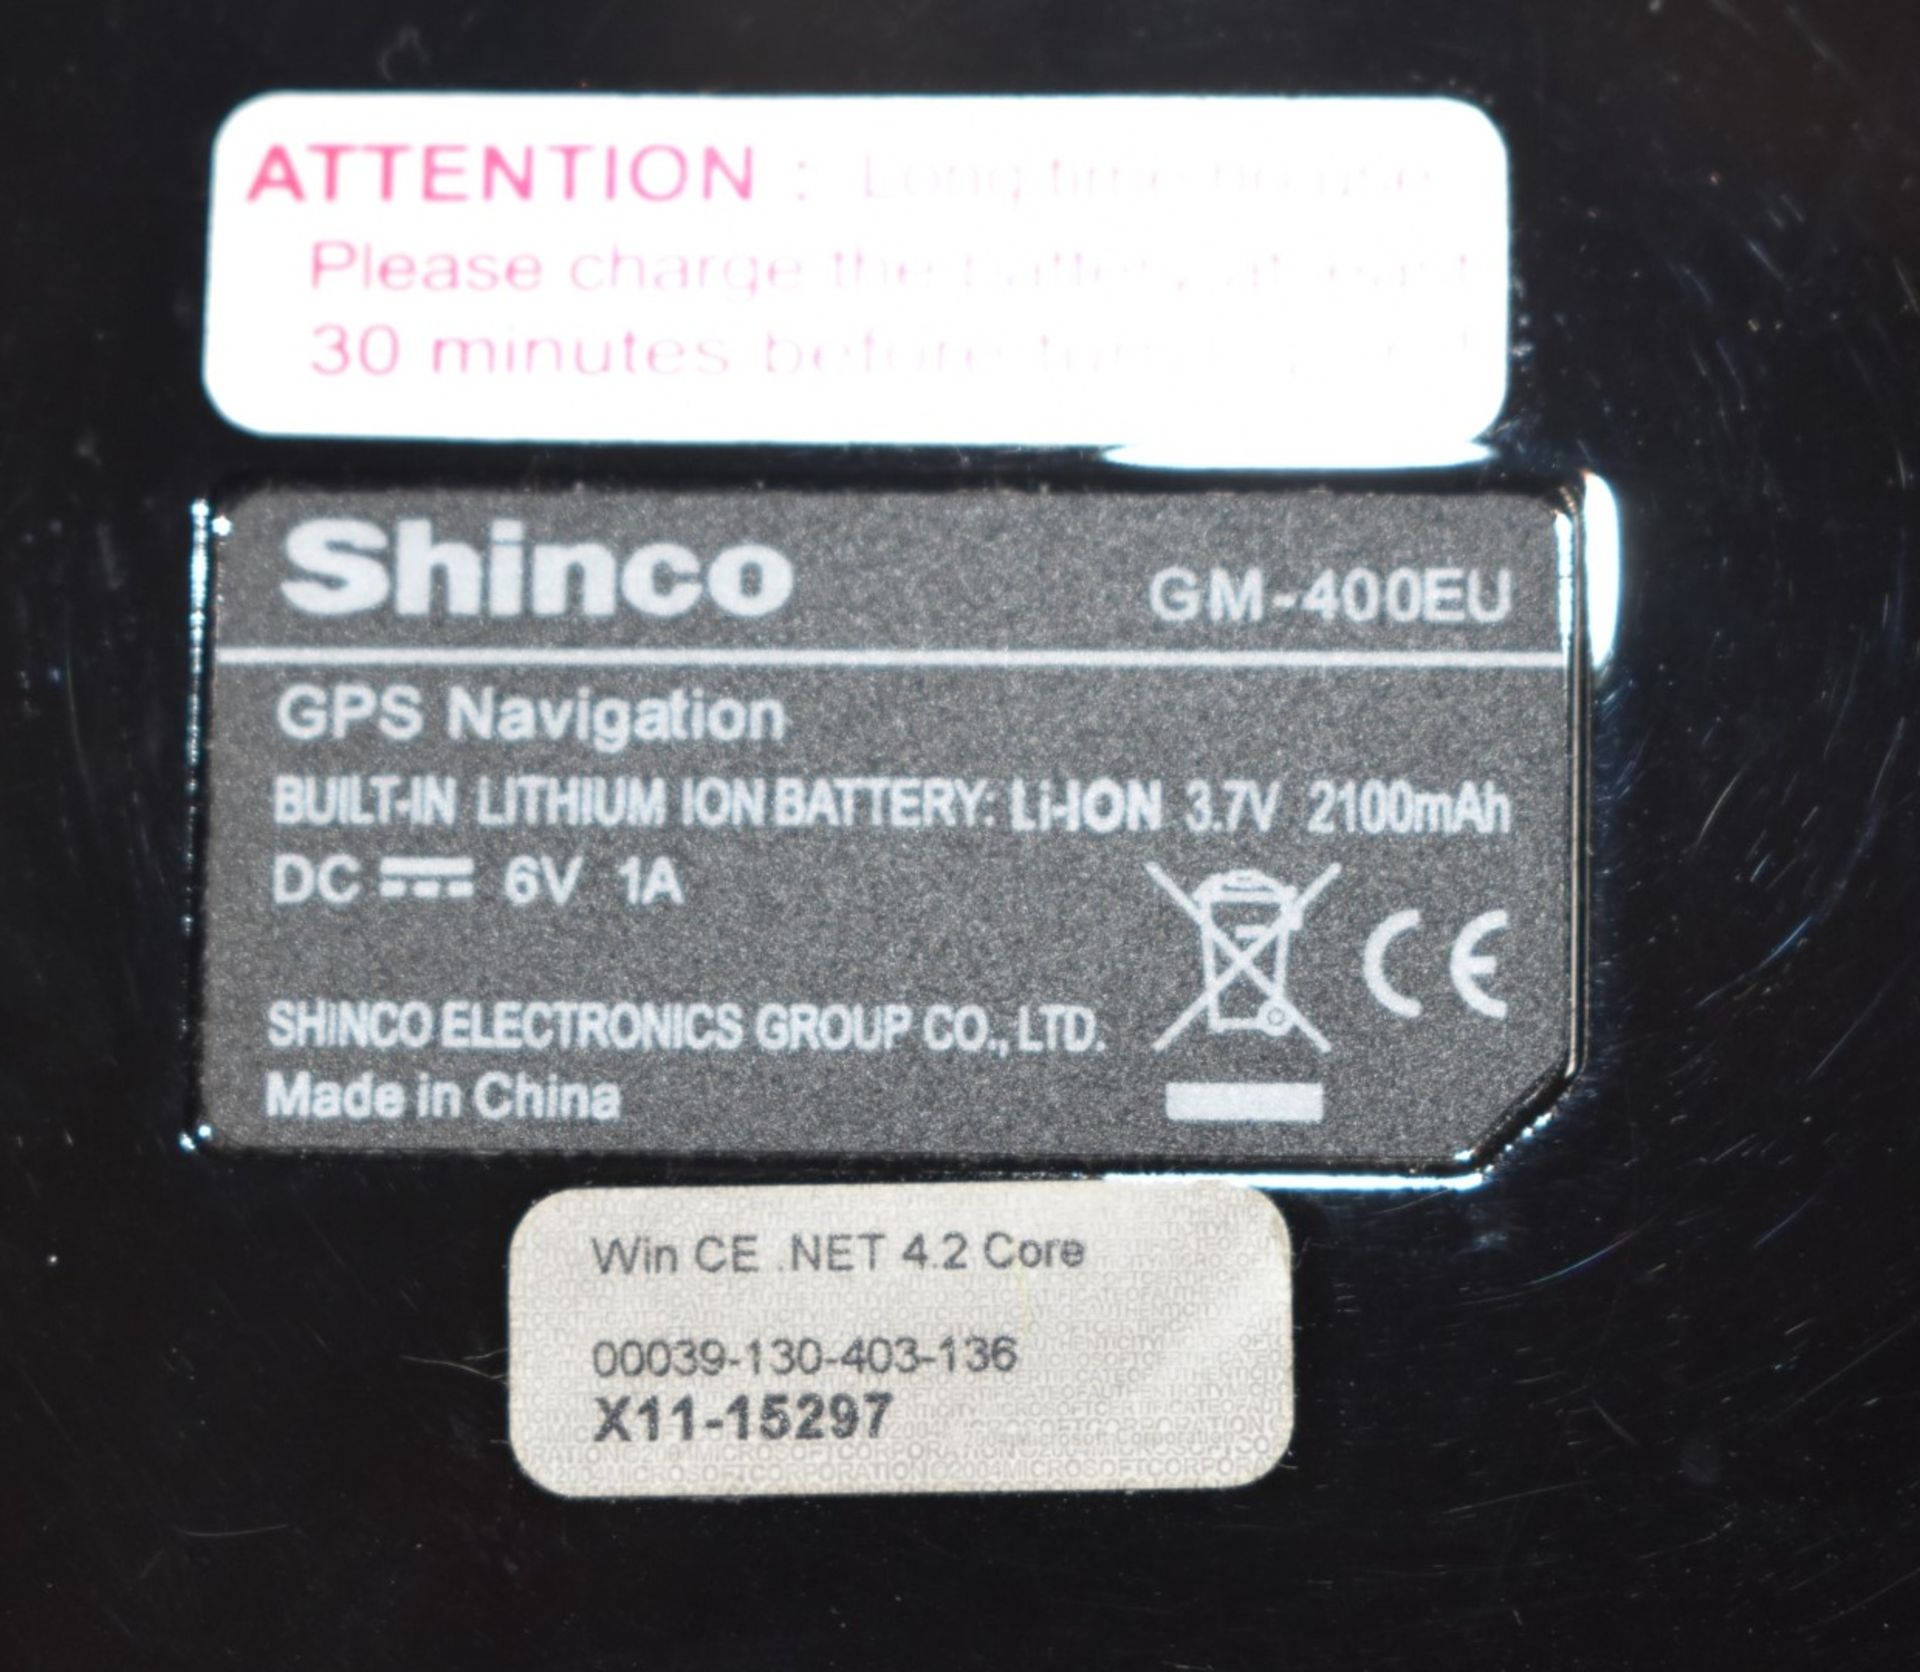 1 x Shinco GM400EU Sat Nav With Case and Accessories - Image 6 of 6